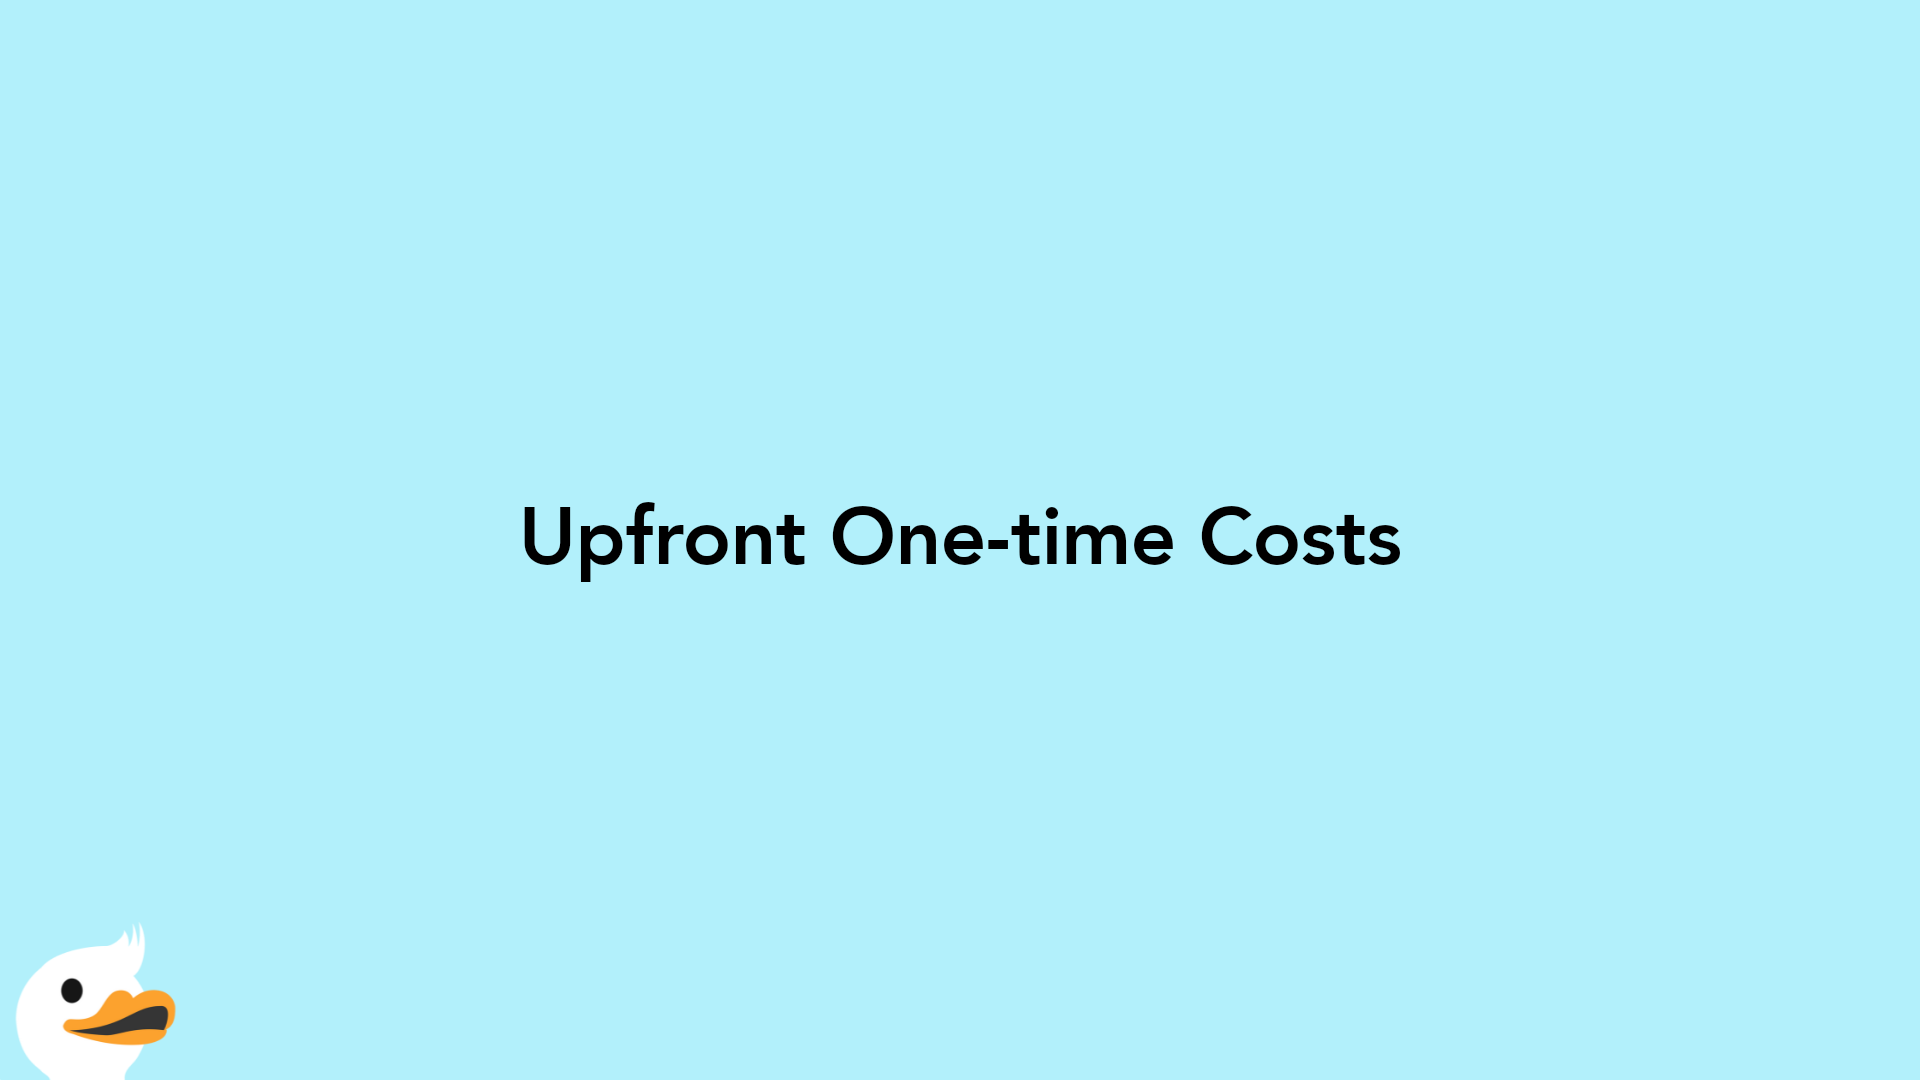 Upfront One-time Costs